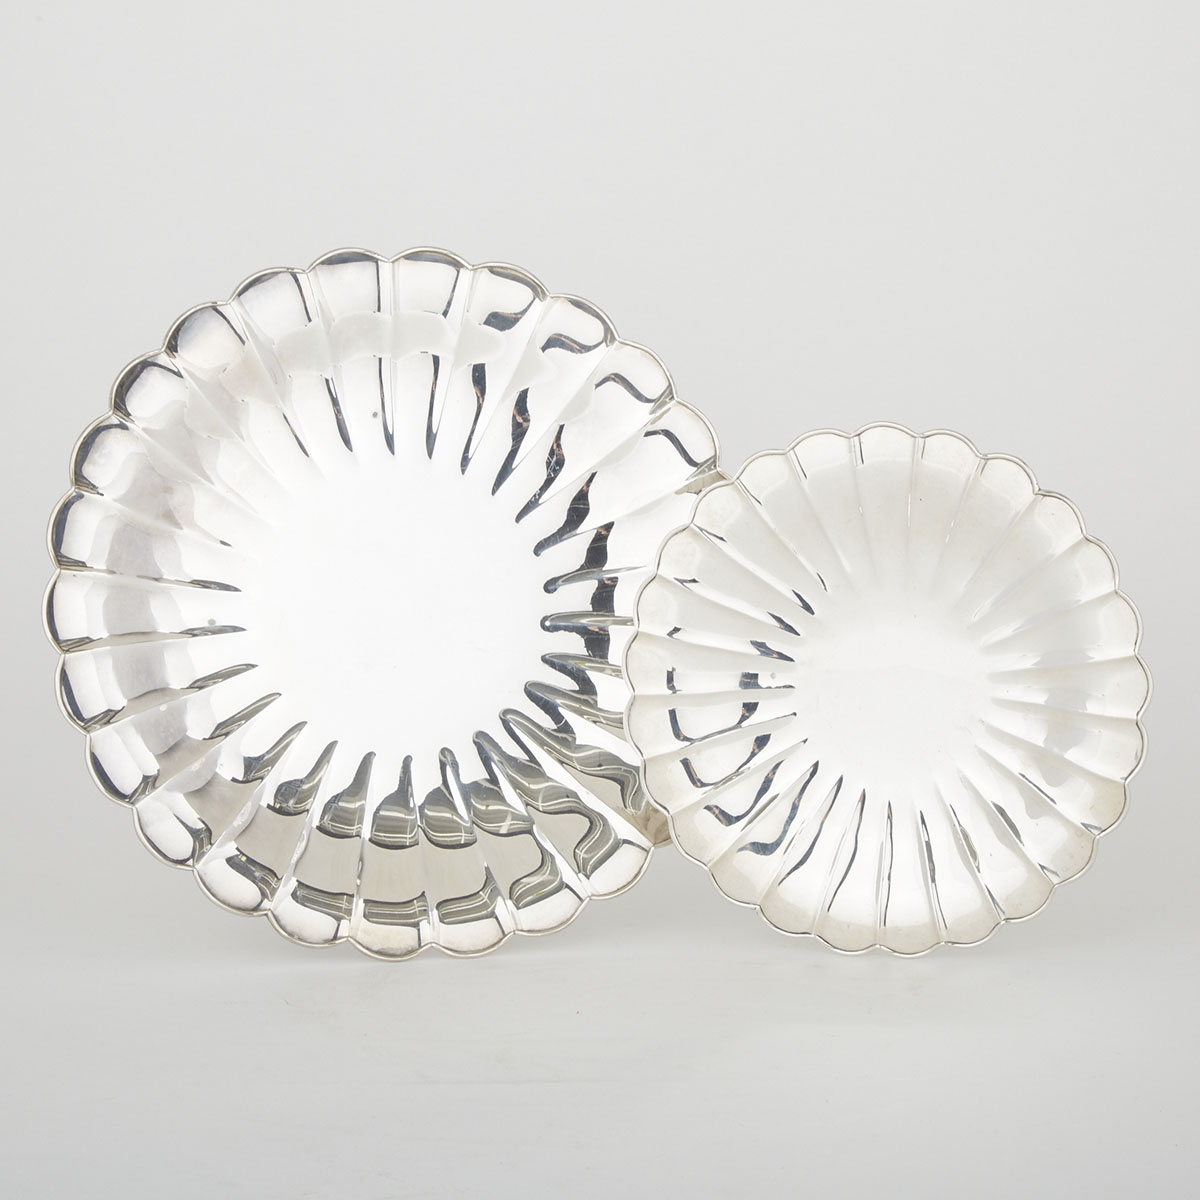 Two Japanese Silver Fluted Serving Plates, K. Uyeda, Tokyo, 20th century